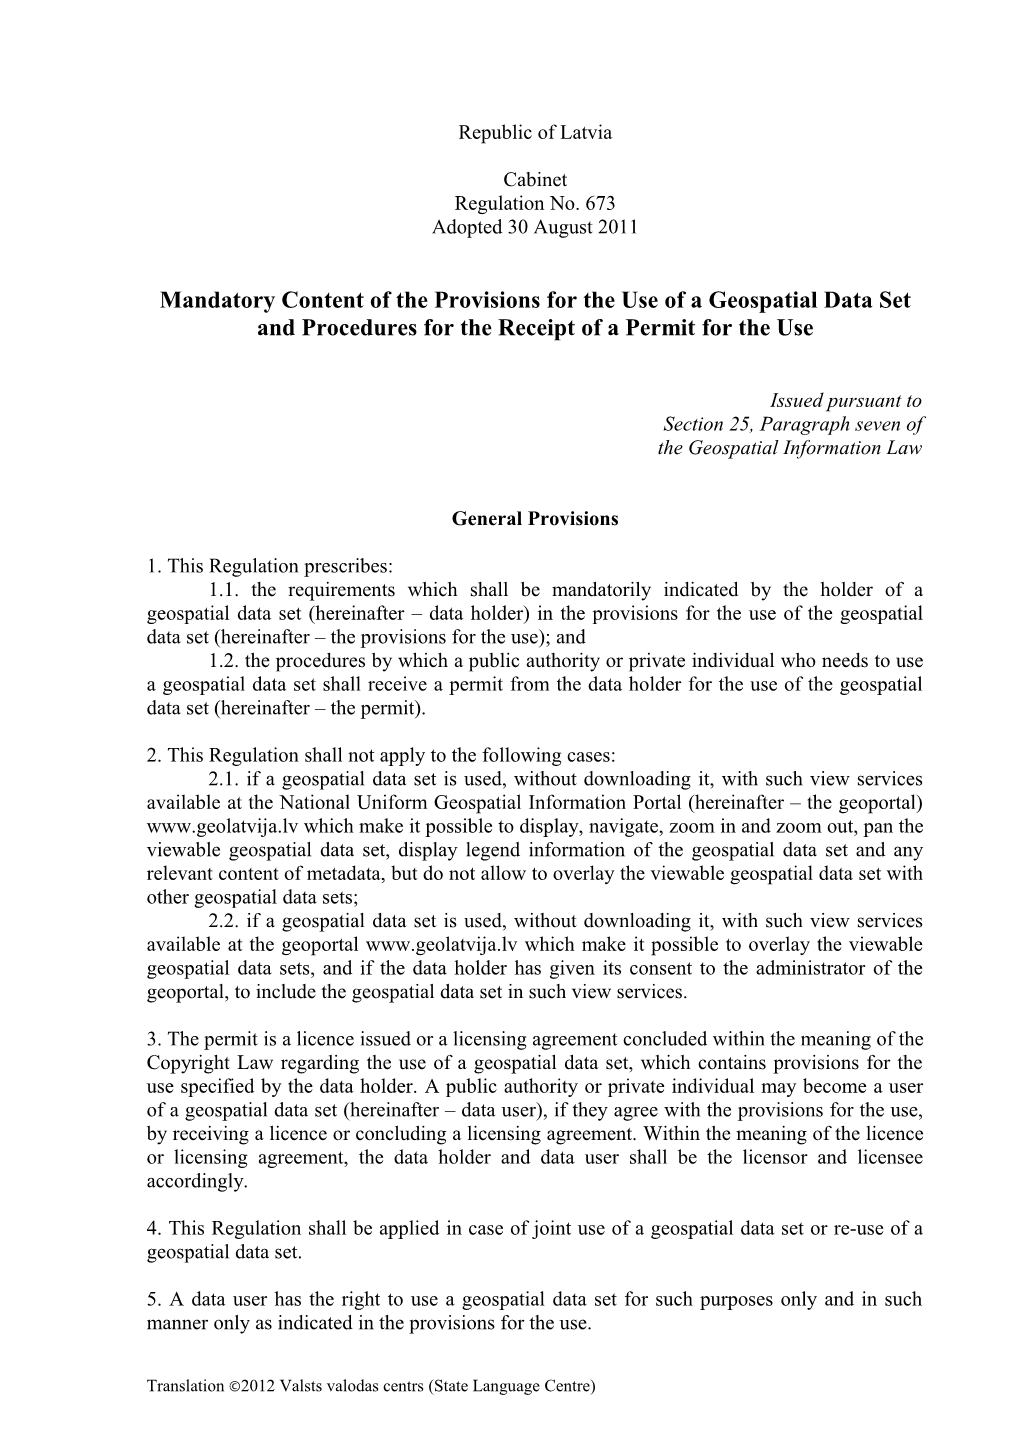 Mandatory Content of the Provisions for the Use of a Geospatial Data Set and Procedures